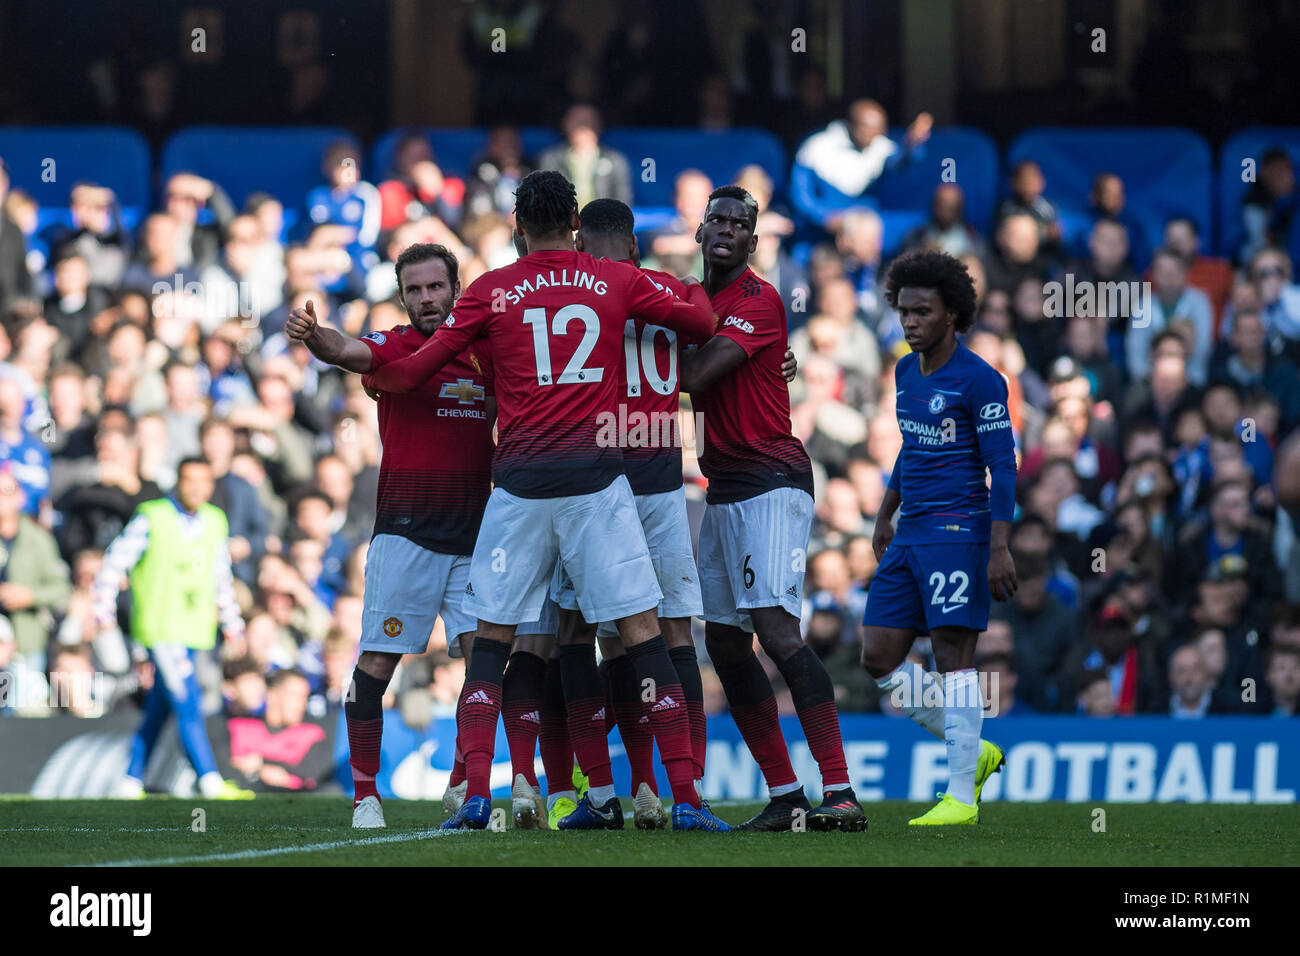 LONDON, ENGLAND - OCTOBER 20: Anthony Martial, Chris Smalling, Paul Pogba, Juan Mata of Manchester United celebrates with team mates after scoring his team's first goal during during the Premier League match between Chelsea FC and Manchester United at Stamford Bridge on October 20, 2018 in London, United Kingdom. (MB Media) Stock Photo